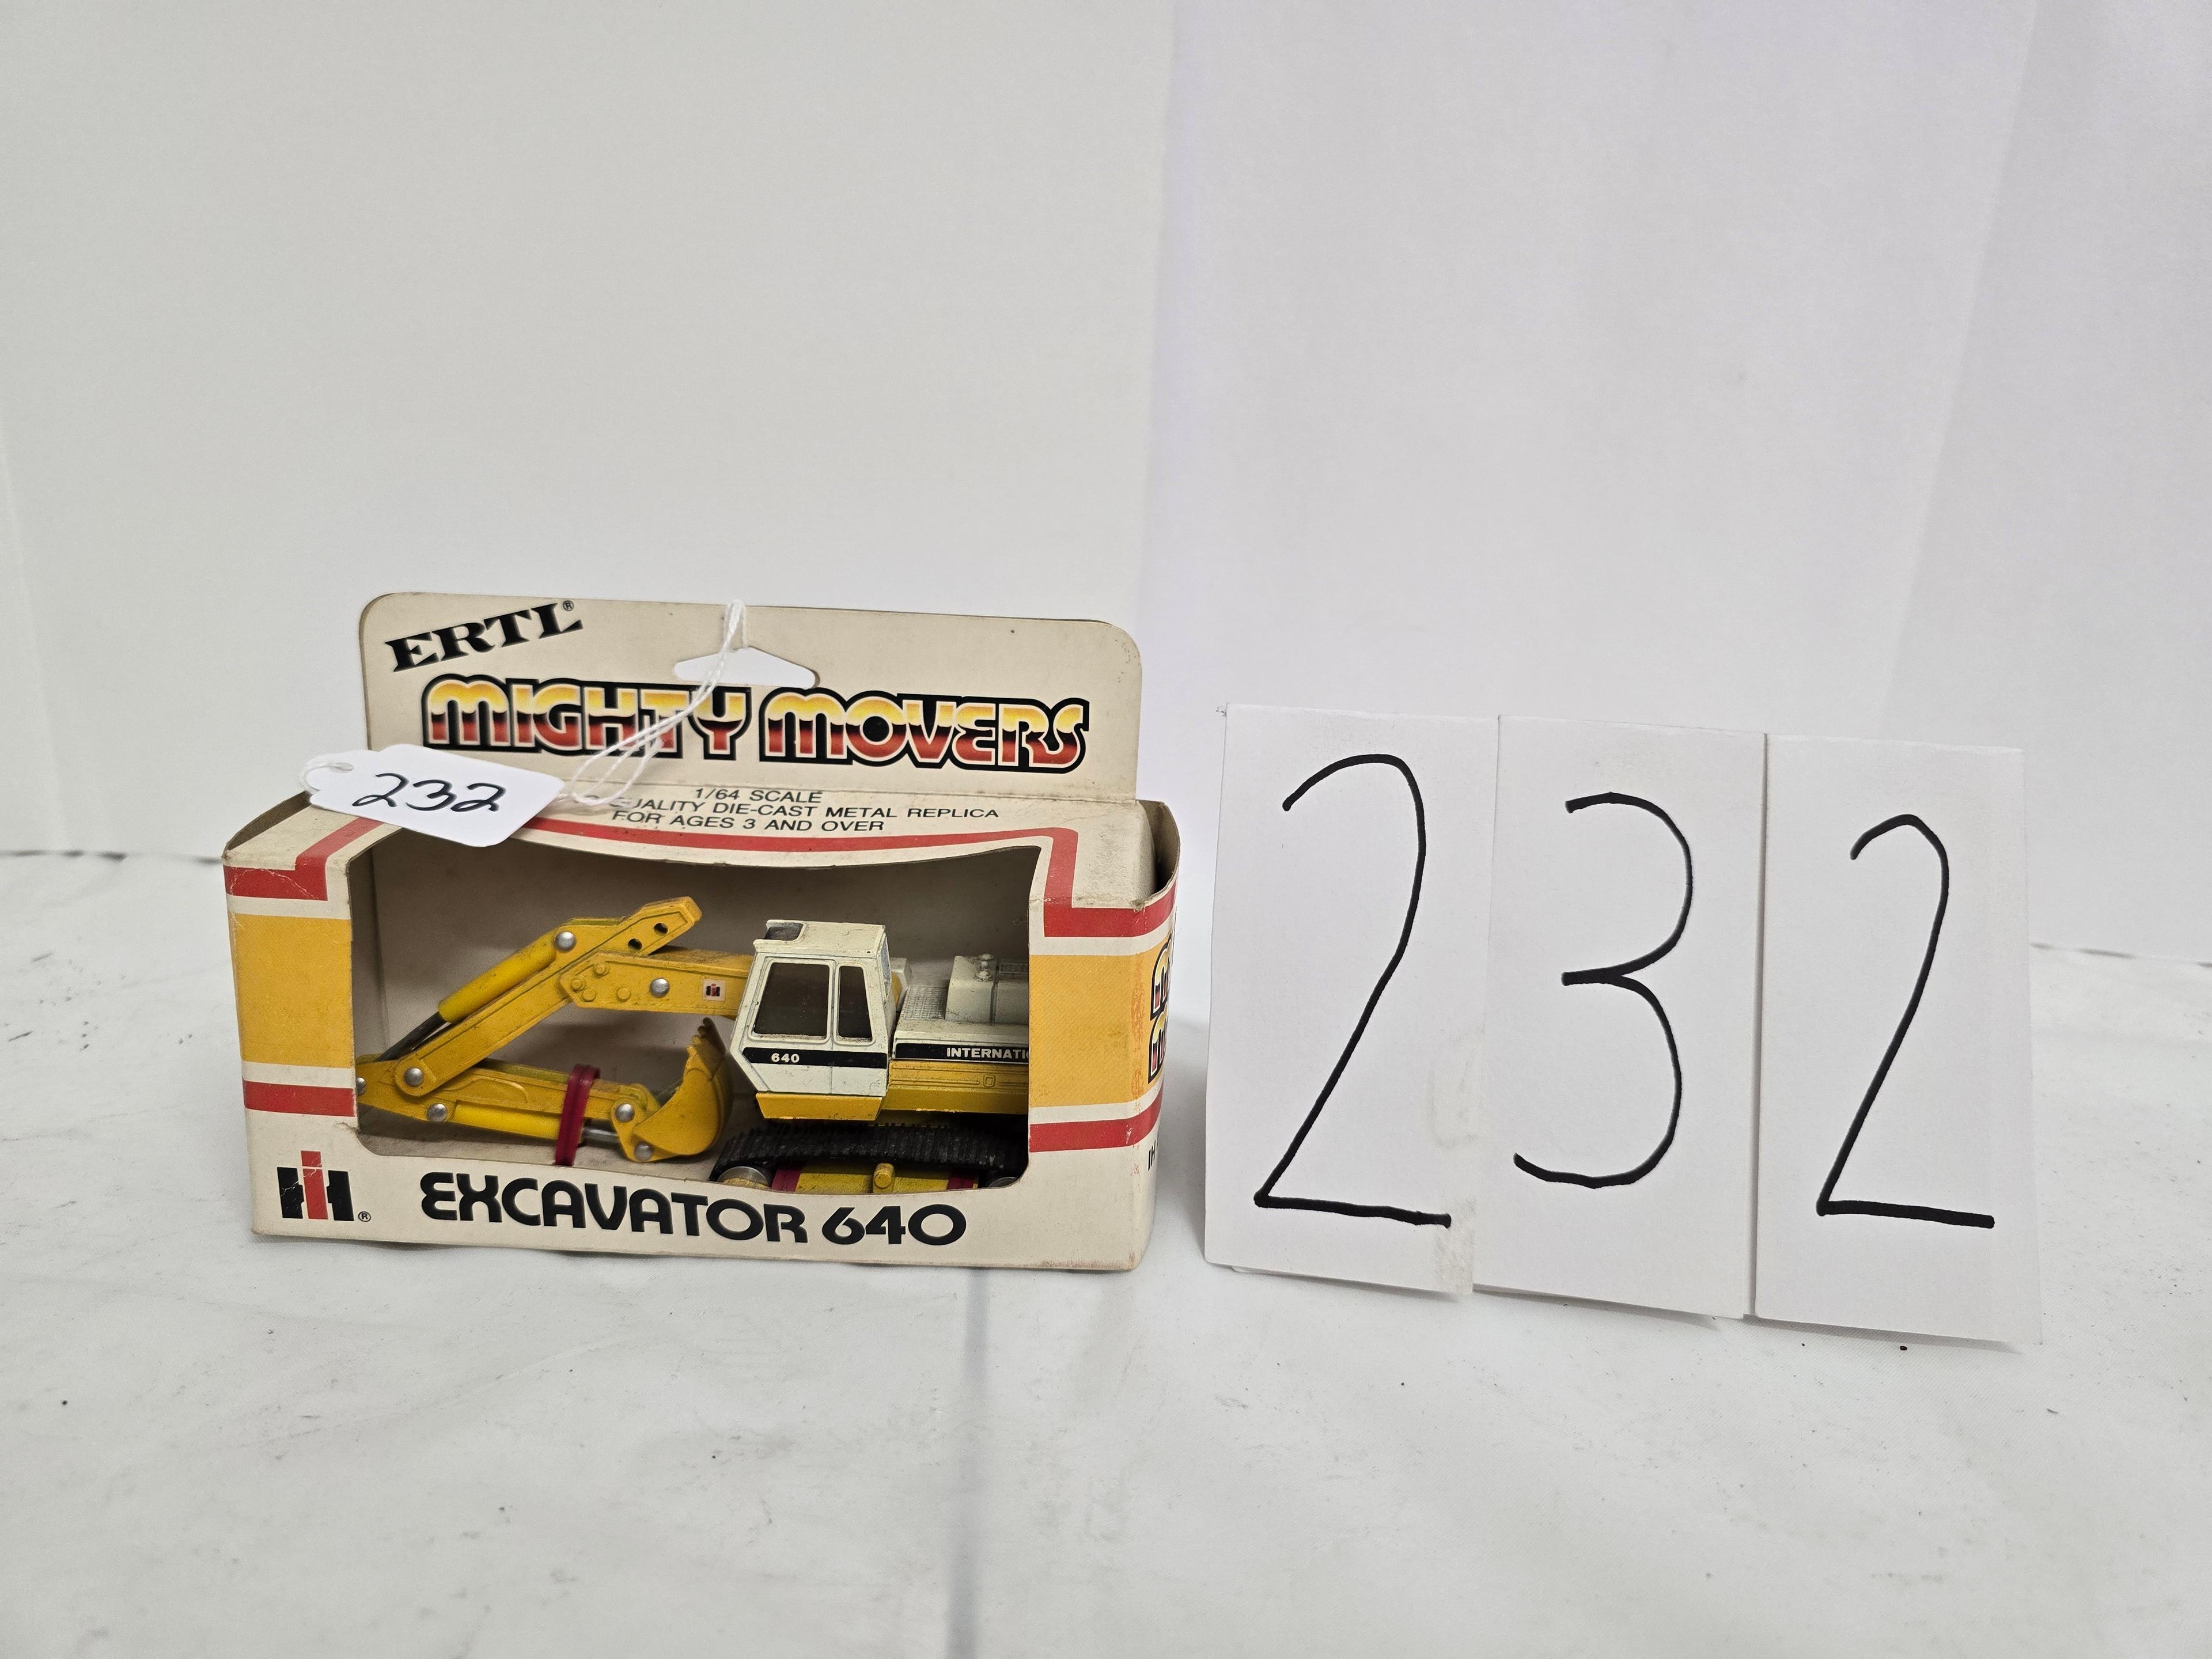 Ertl Mighty Movers IH excavator 640 #1854  1/64 scale box in fair condition